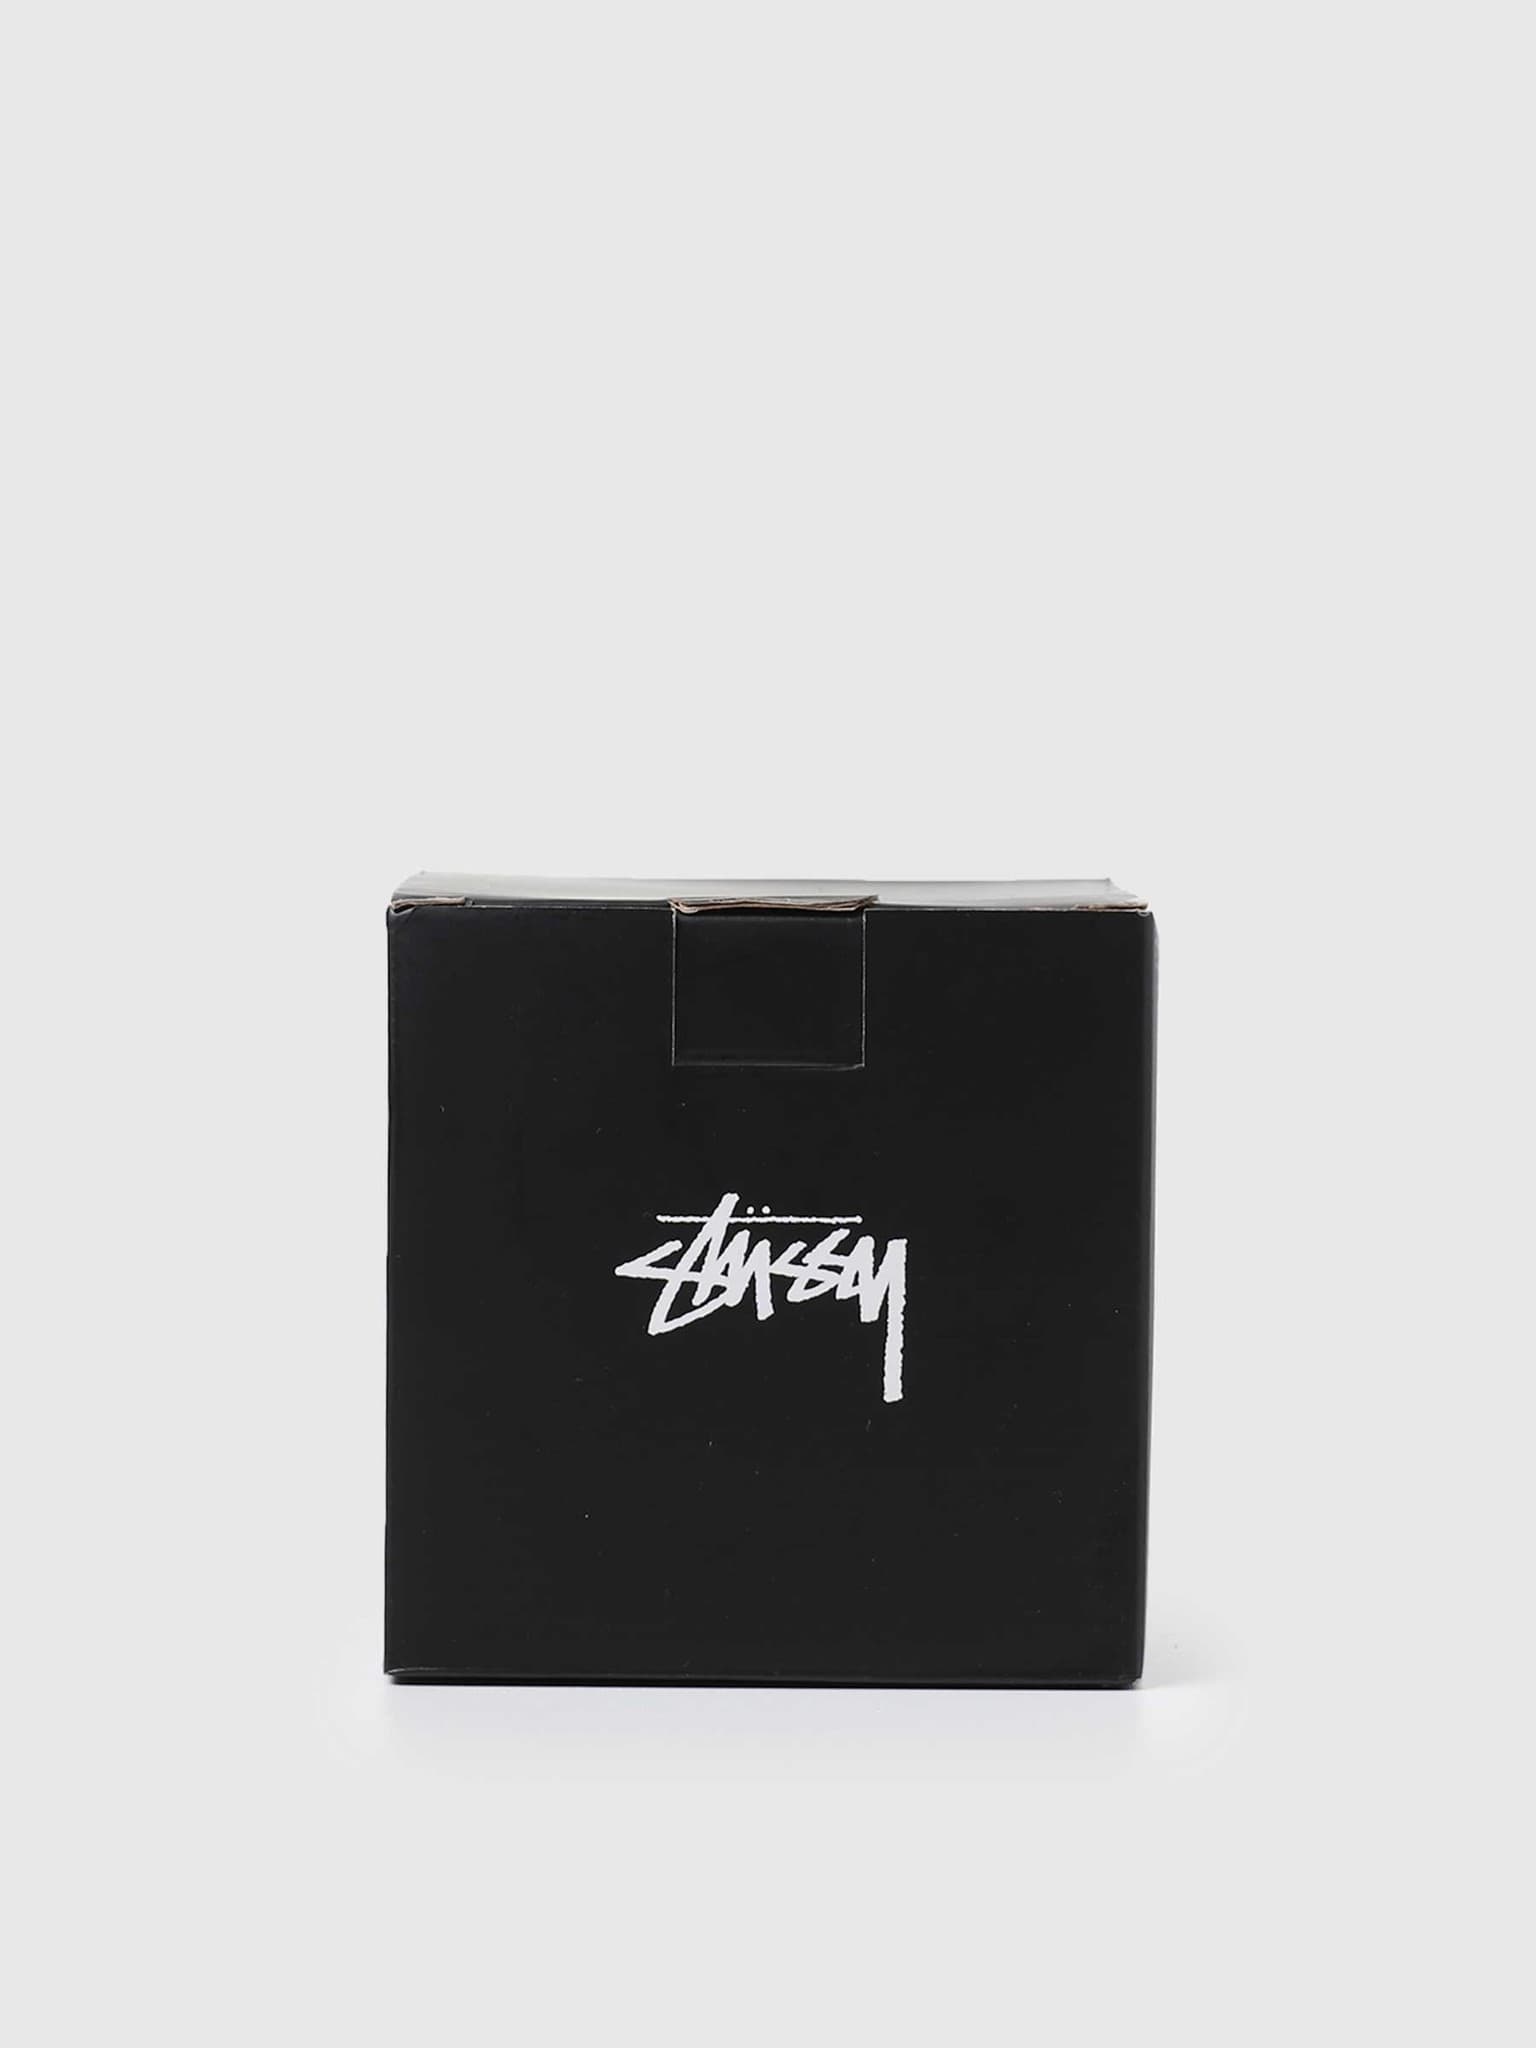 Stussy Cube Candle Yellow 138719-0201